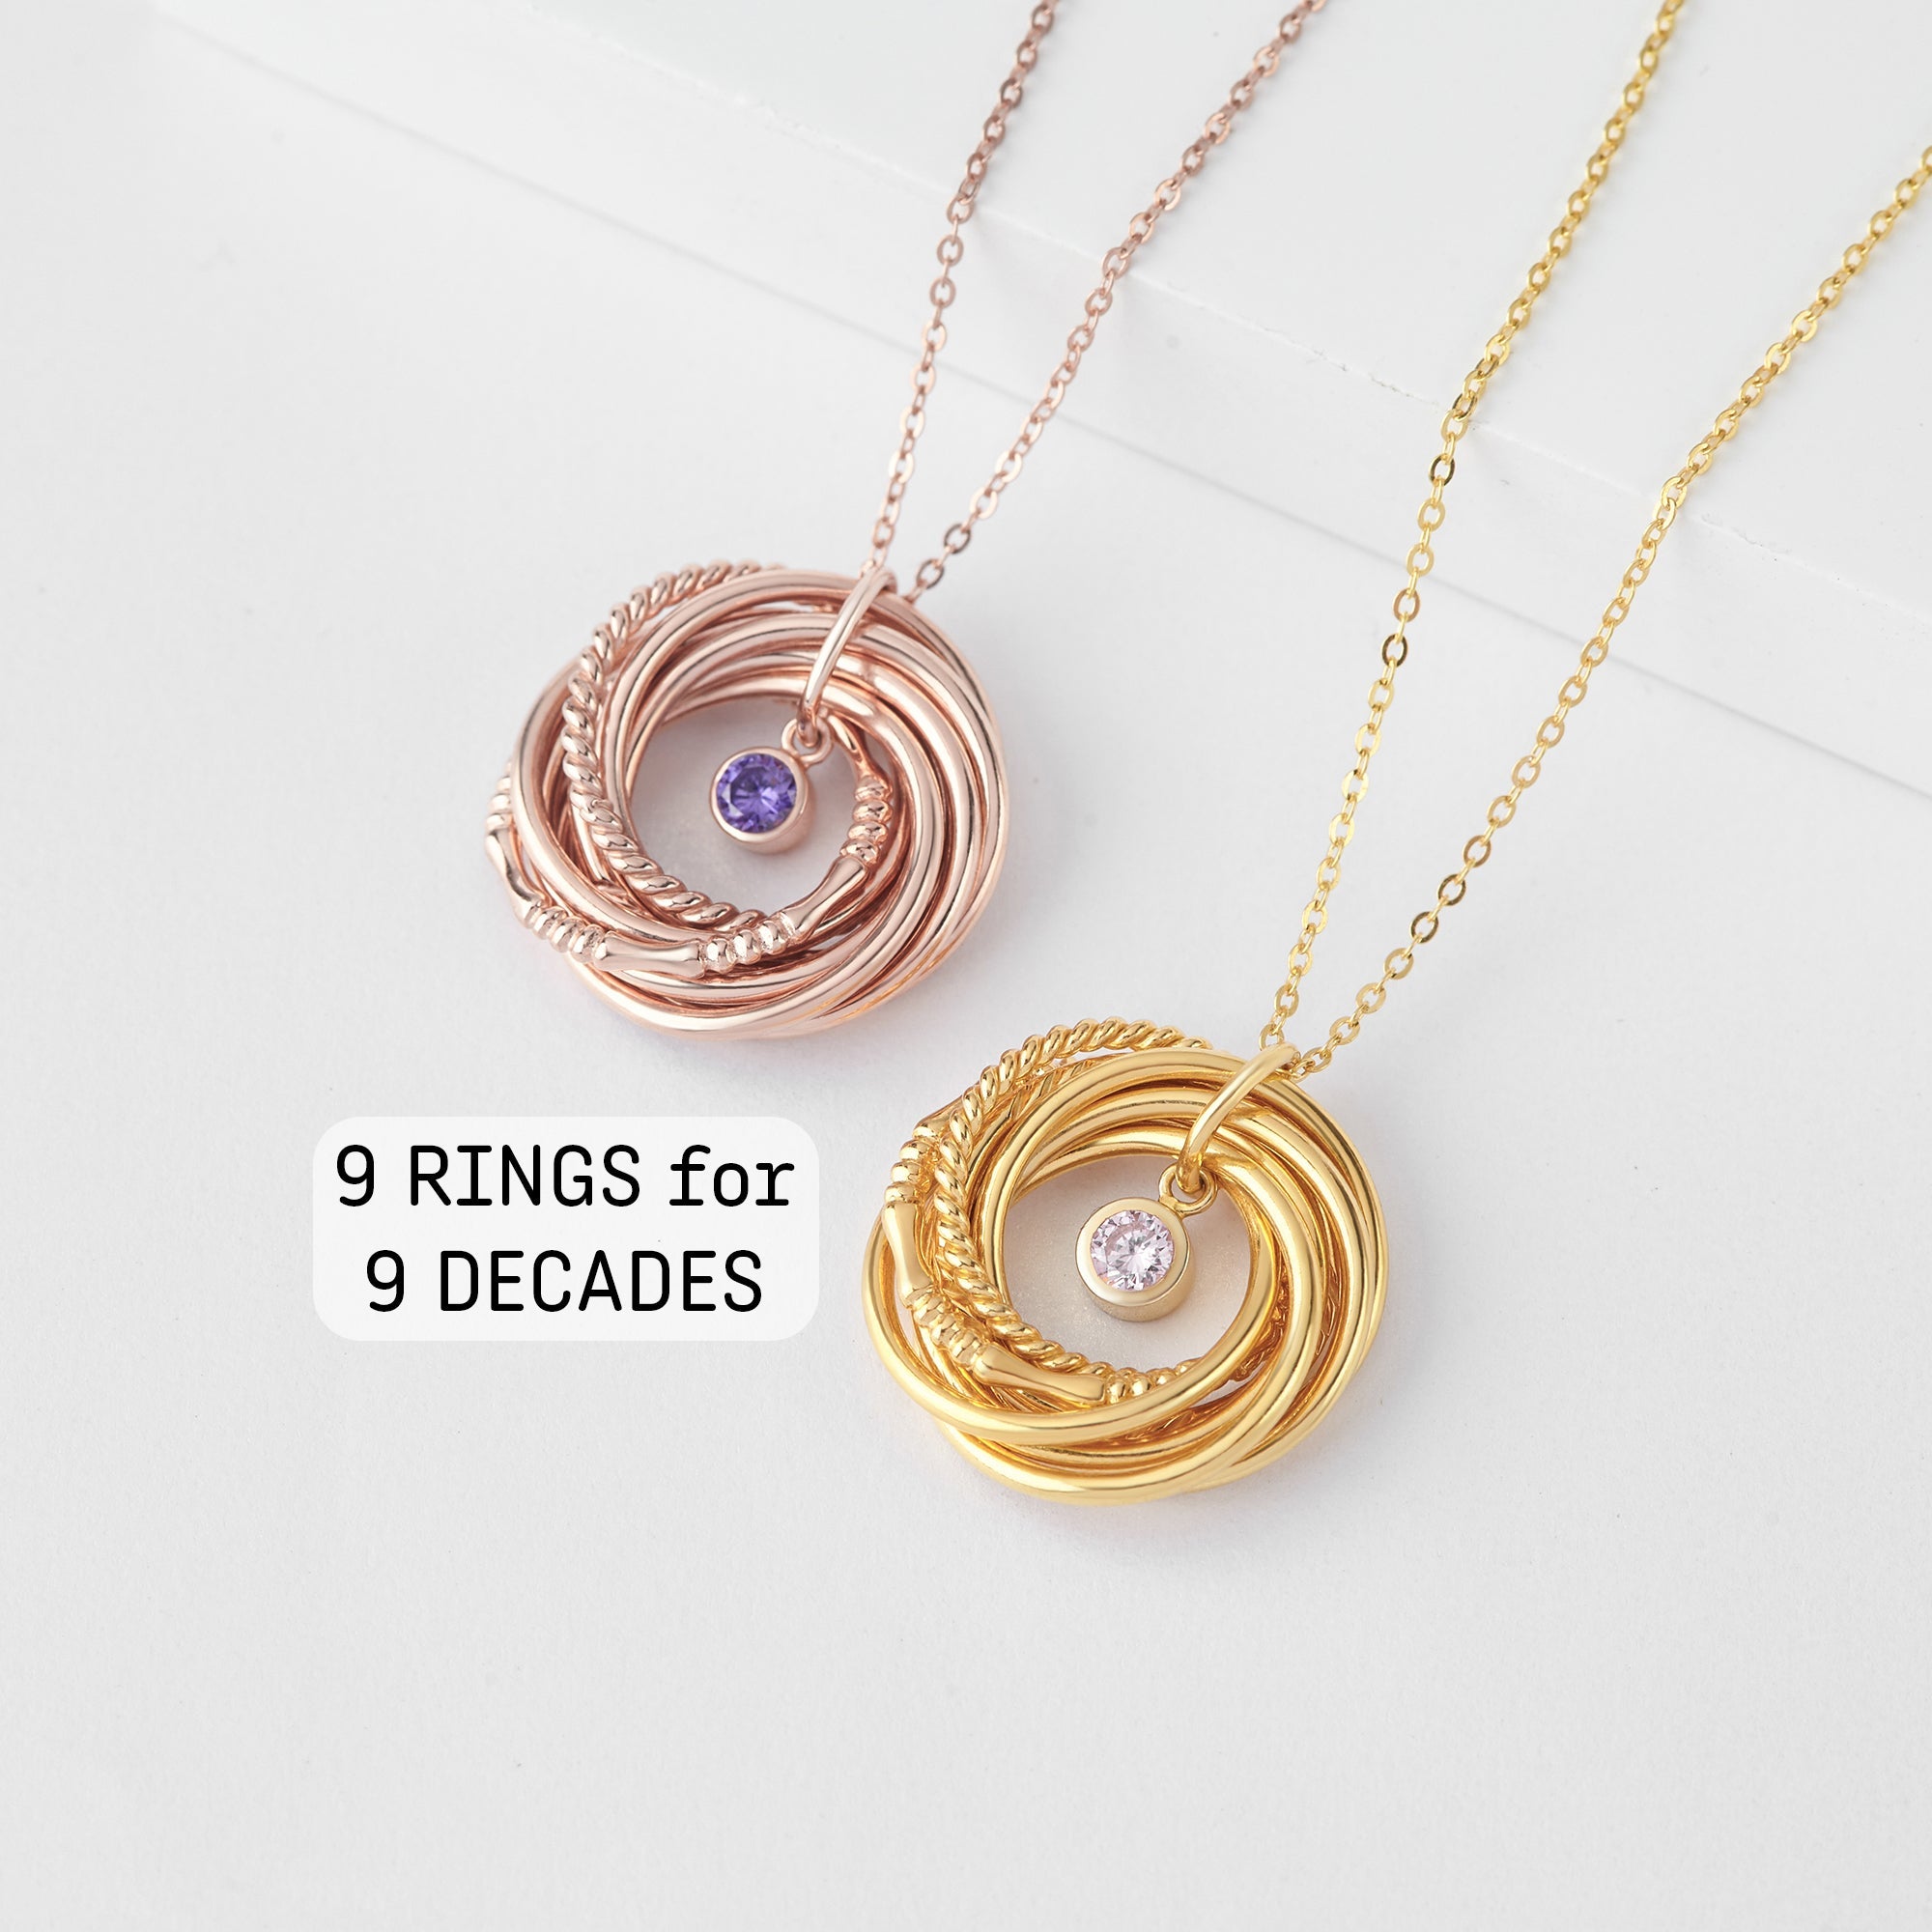 9 Ring Necklace for 90th Birthday with Birthstones, Sterling Silver and 18K Gold Plated Jewelry Gift for Mom or Grandma Bijou Her